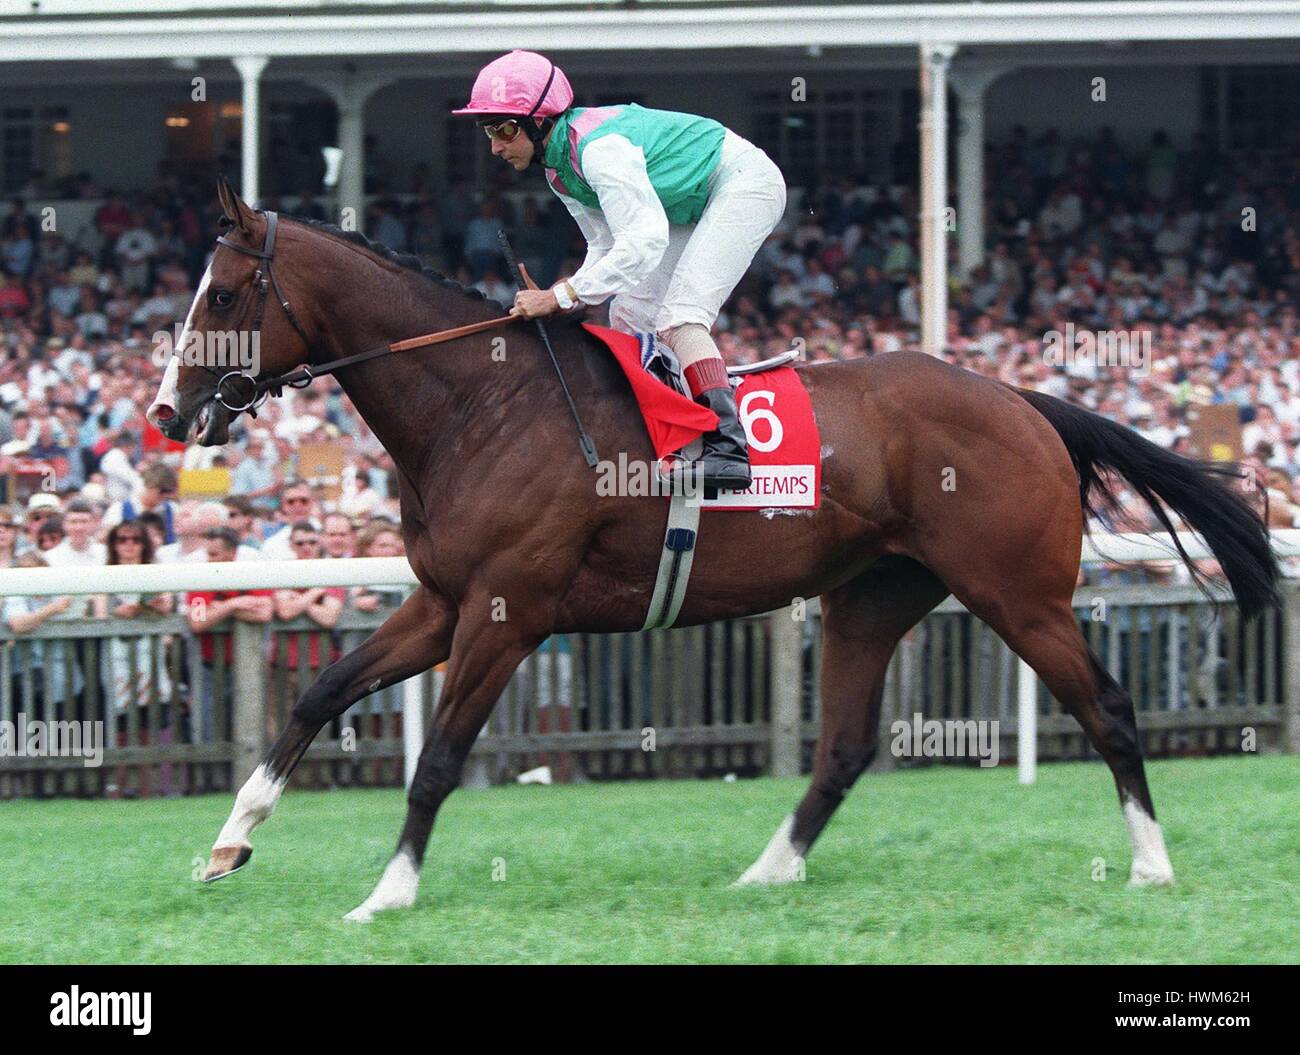 ZAMINDAR RIDDEN BY THEIRRY JARNET 23 May 1997 Stock Photo